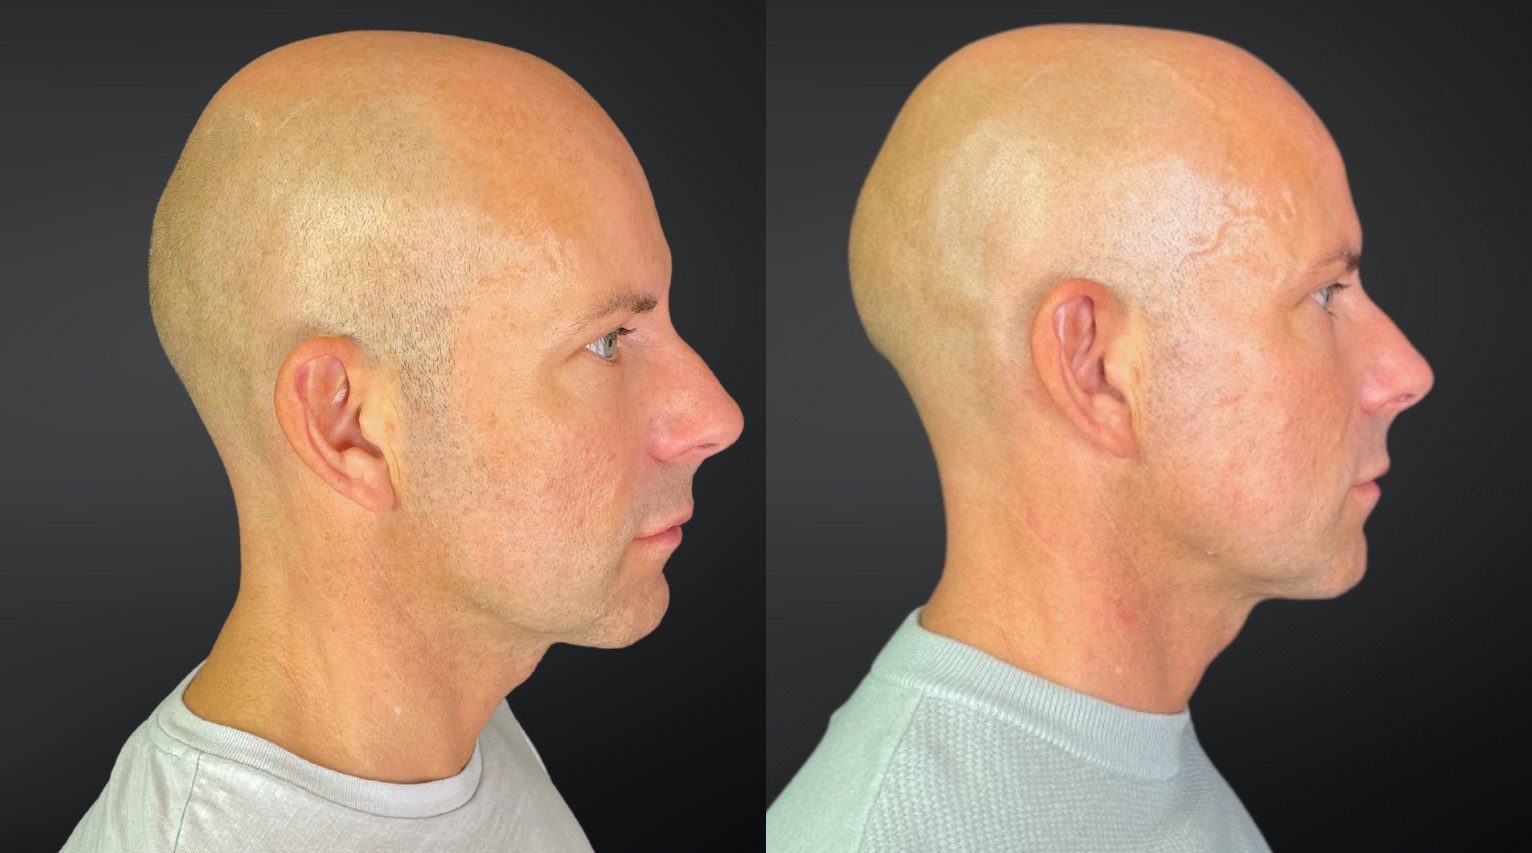 fillers lower face, jawline contour before and after